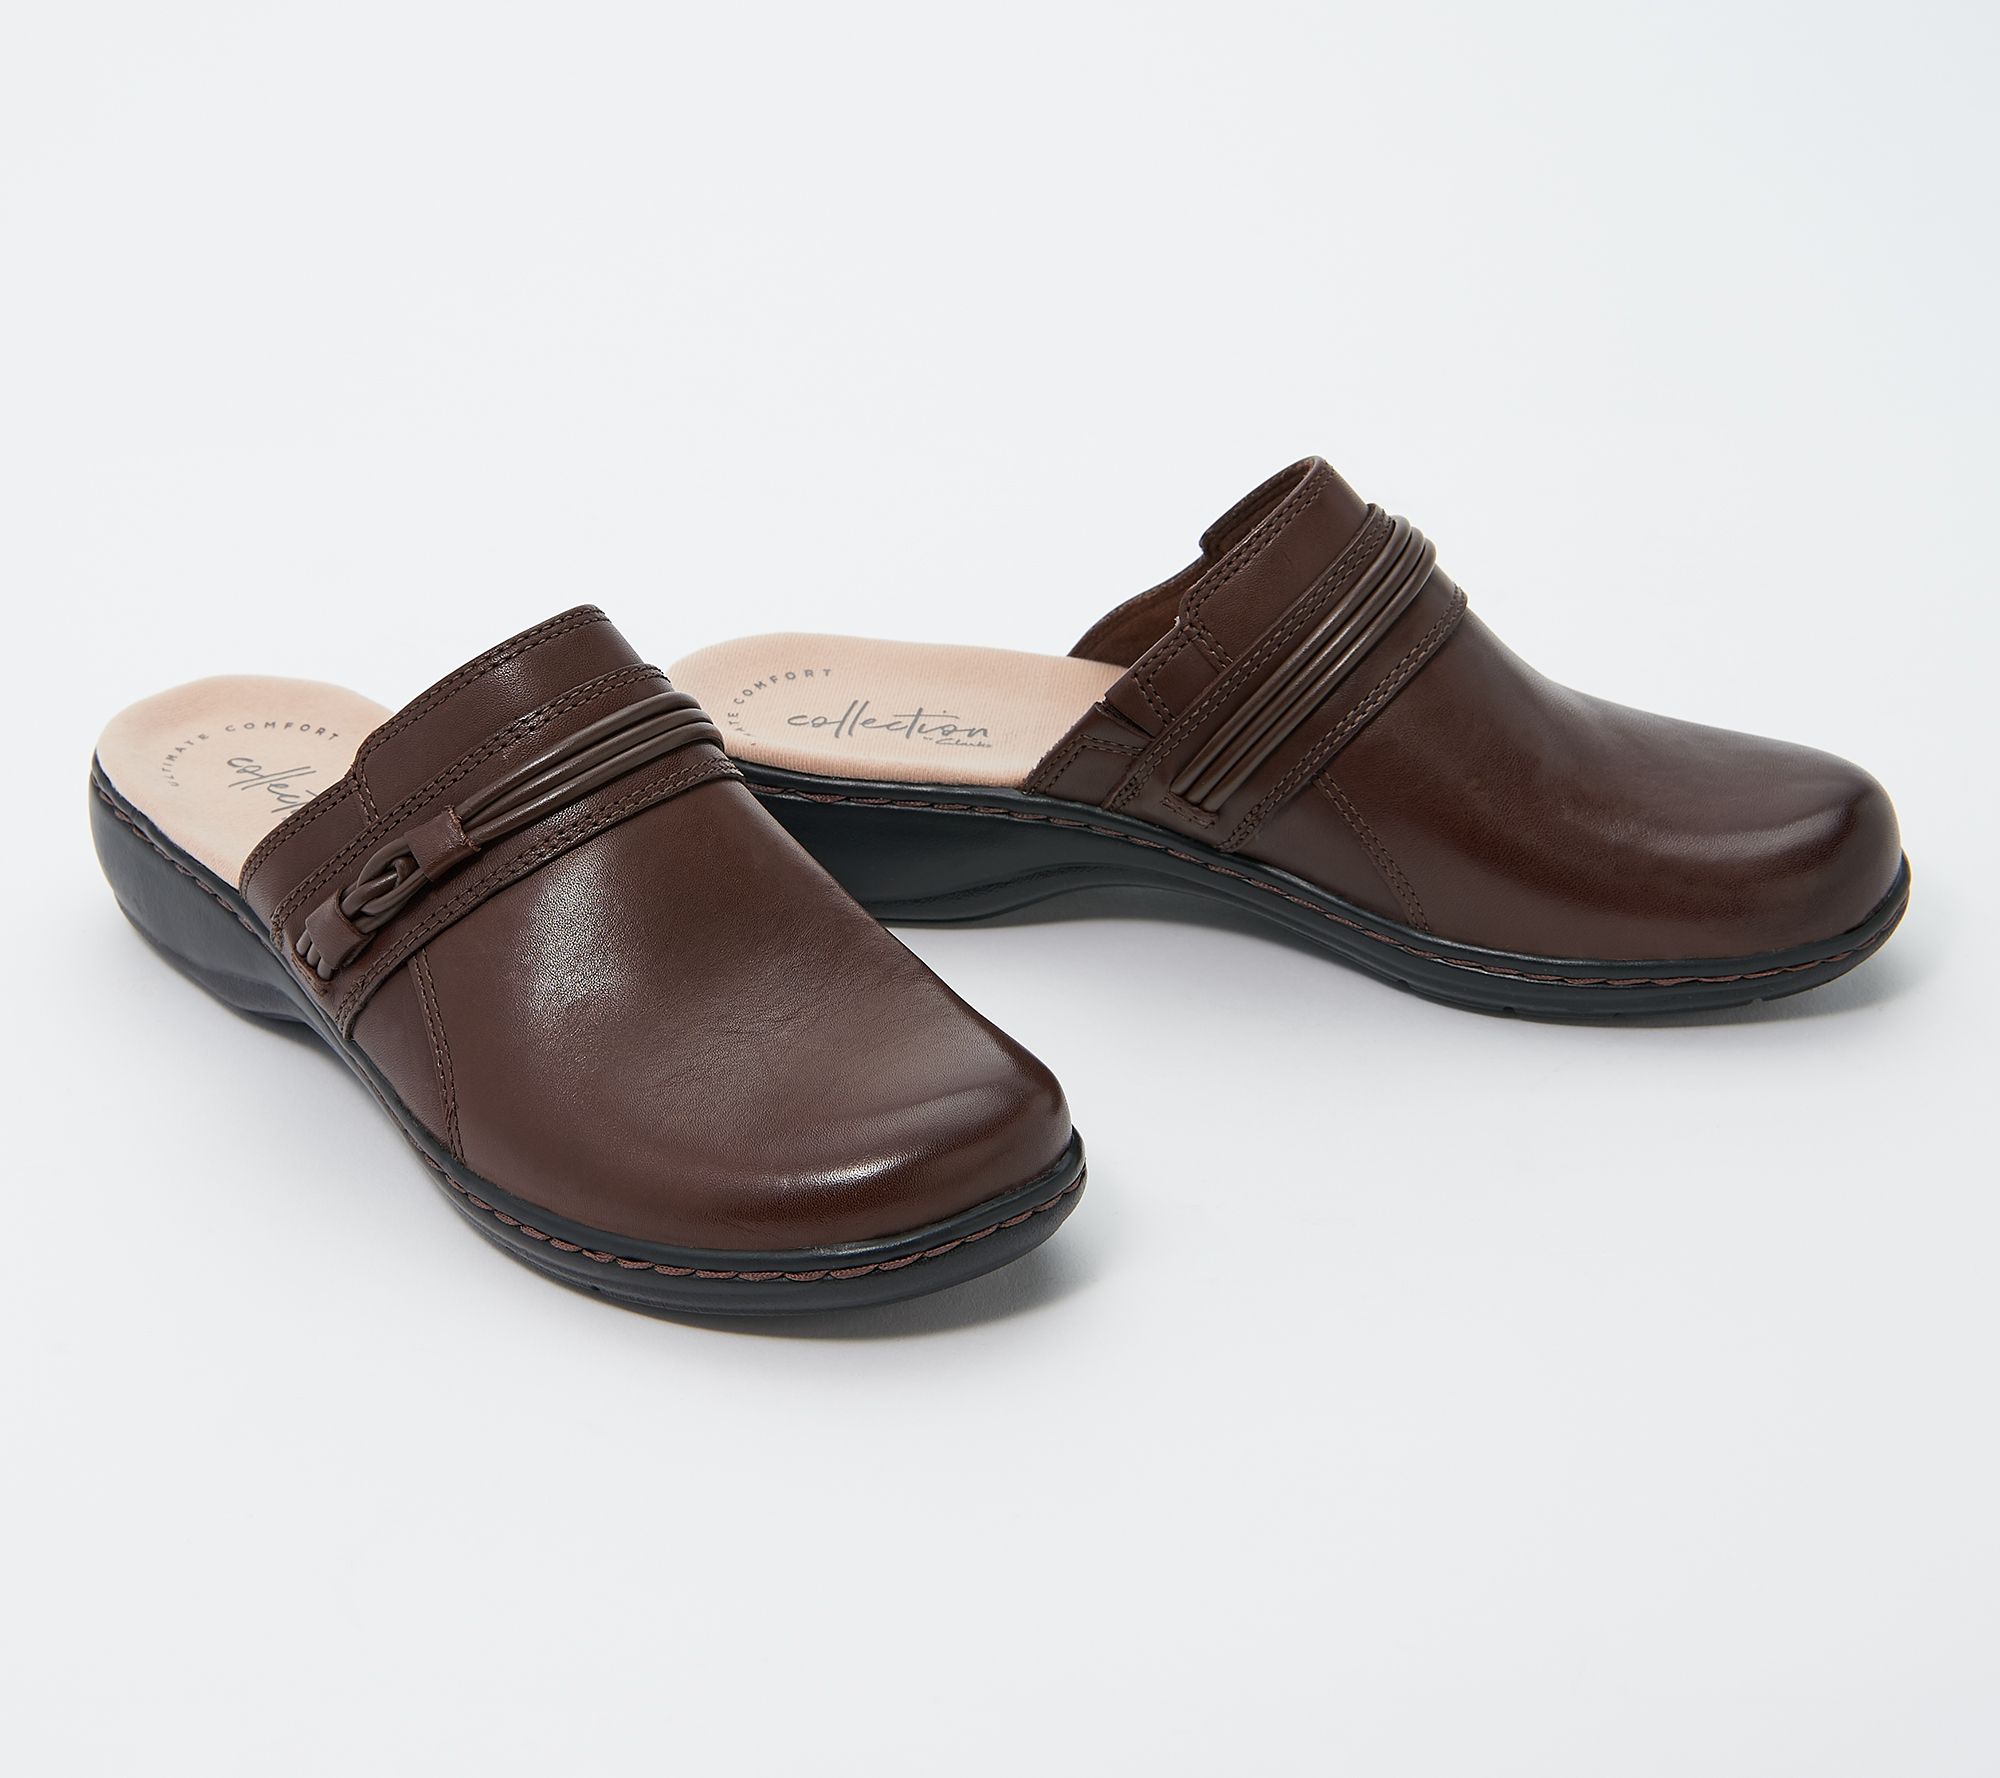 Clarks Collection Leather Clogs - Leisa Clover - QVC.com